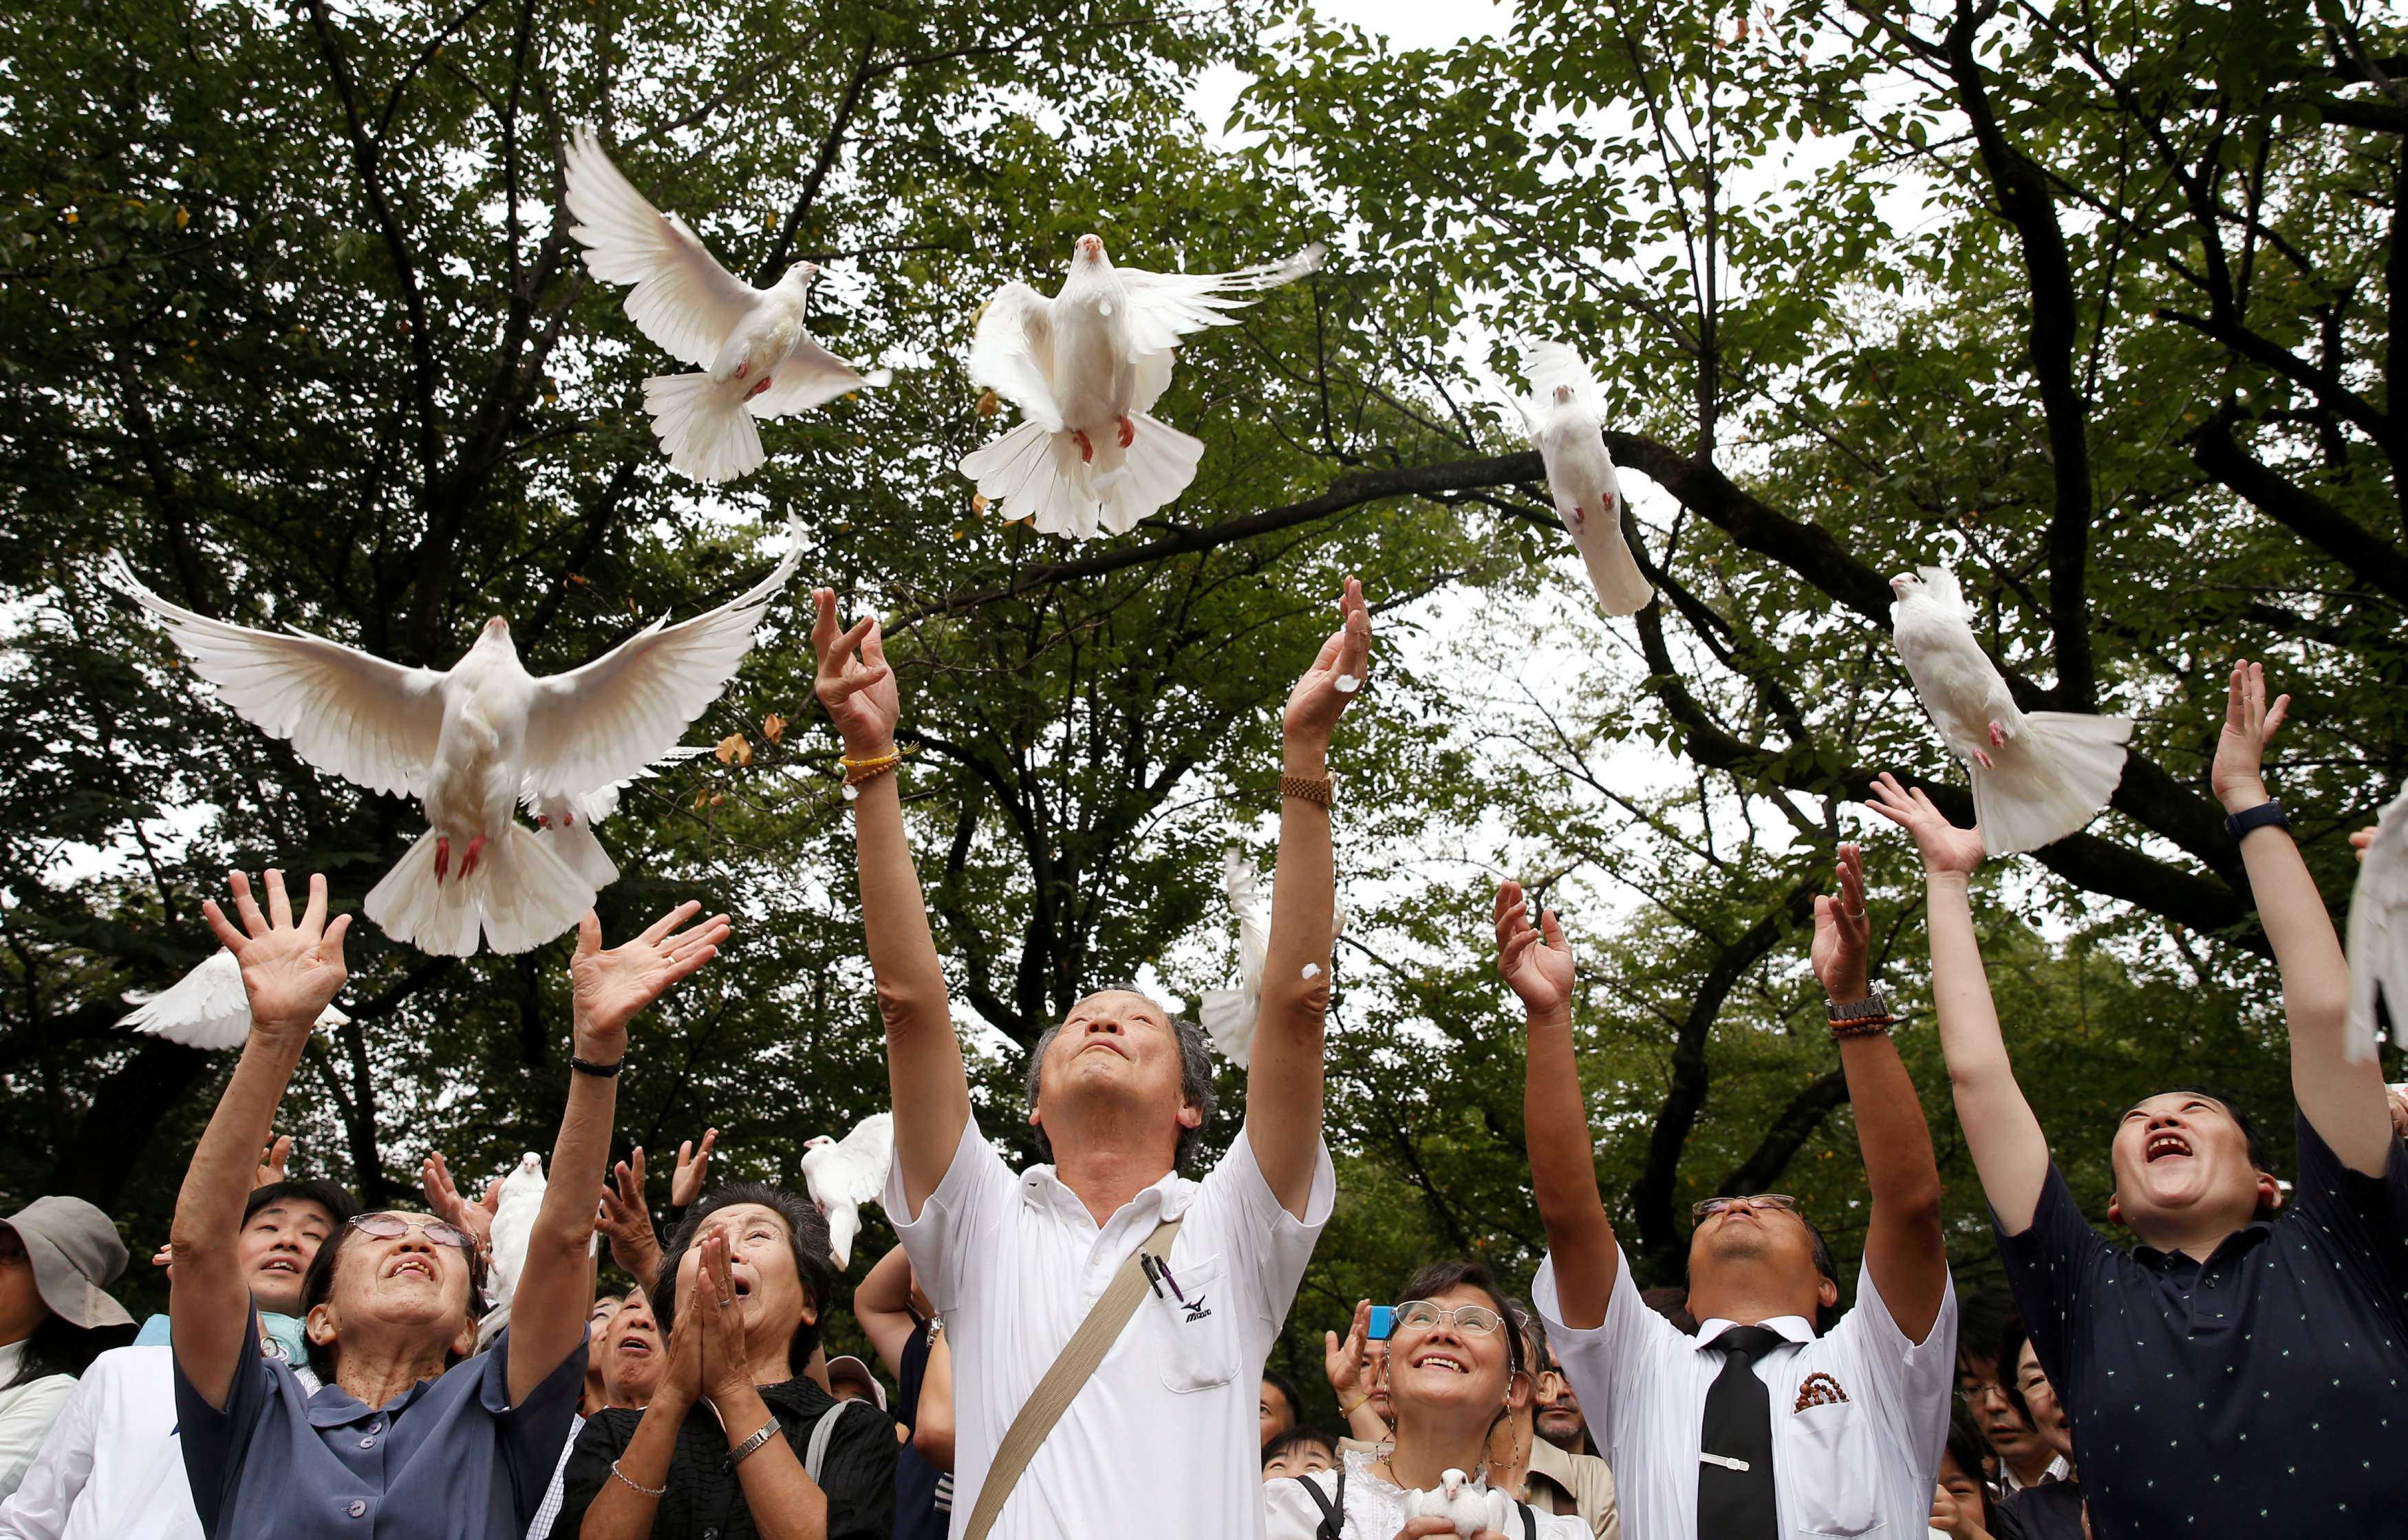 People release doves as a symbol of peace at the Yasukuni Shrine in Tokyo, in August 2016, to mark the anniversary of the end of the second world war. Photo: Reuters